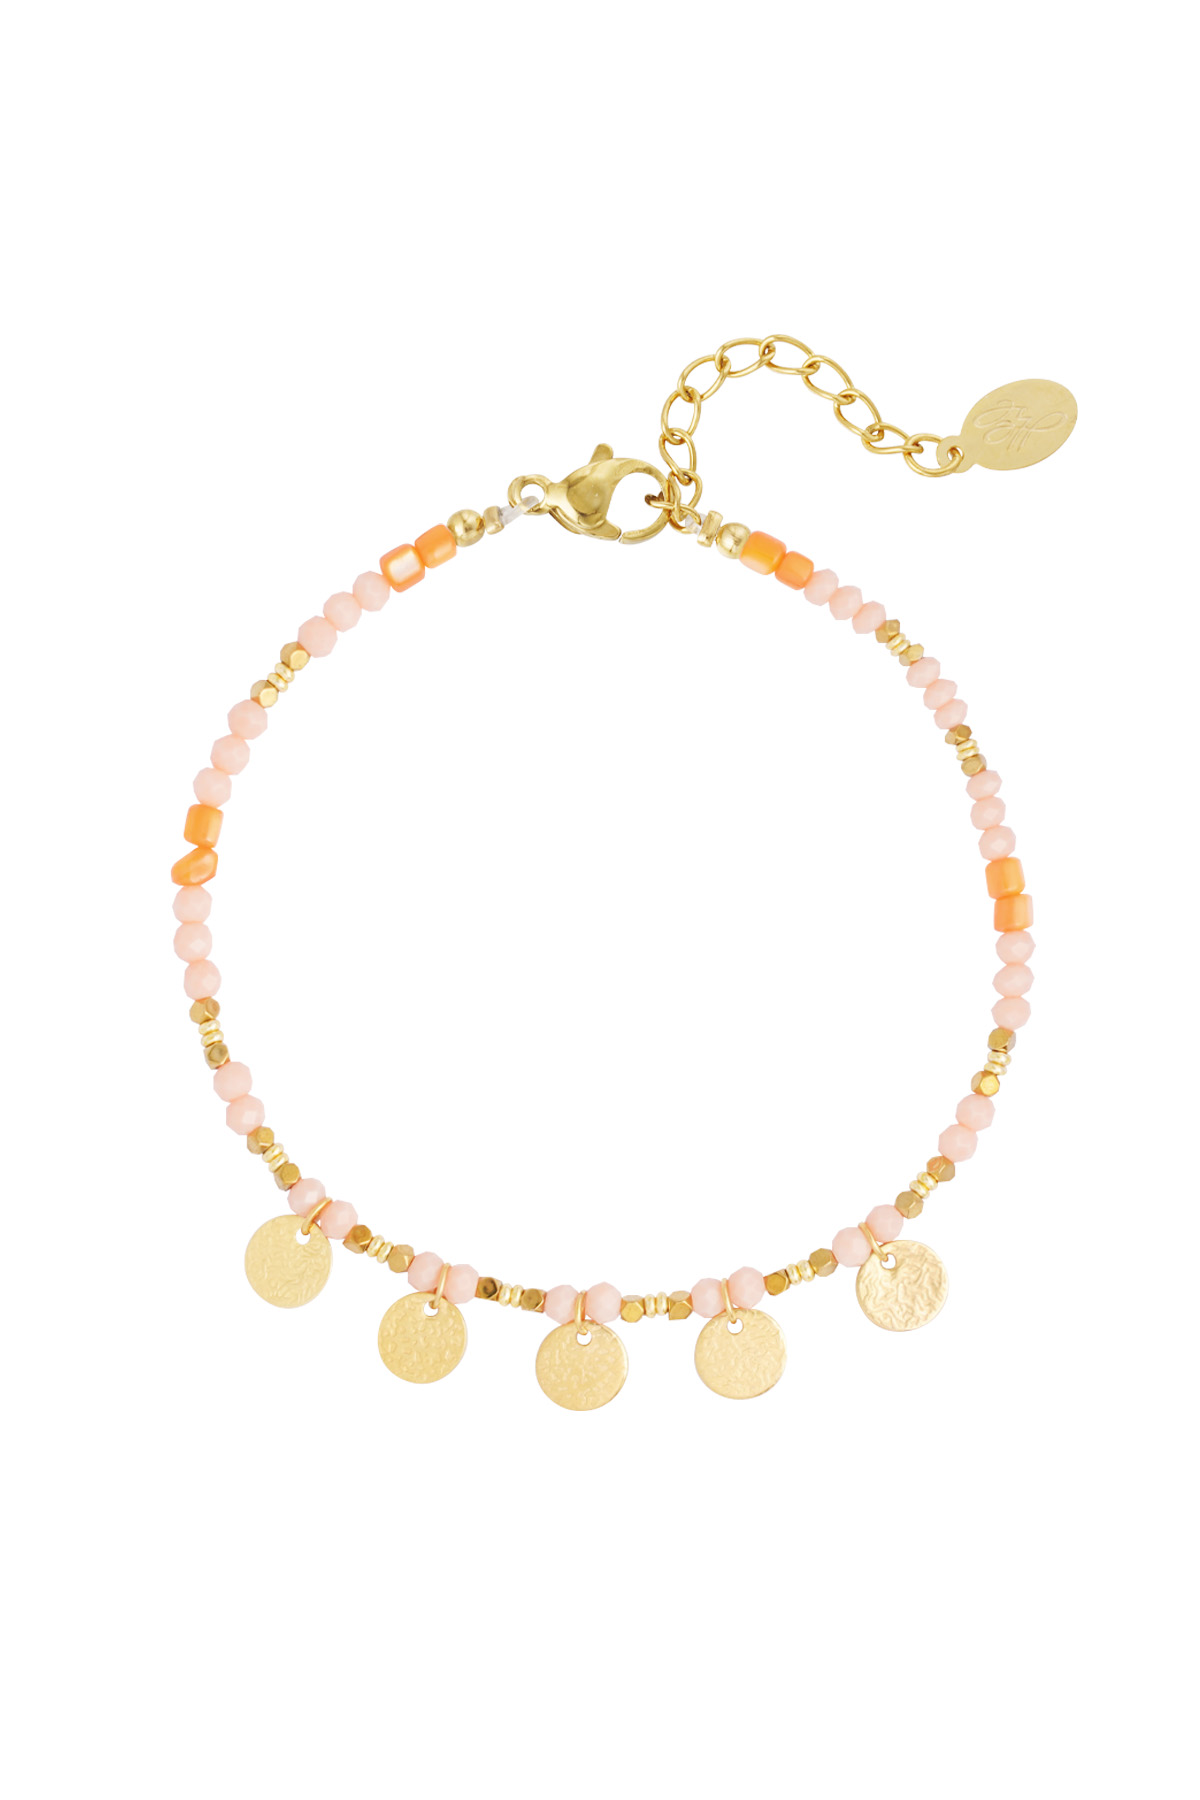 Anklet with coin charms - orange/gold